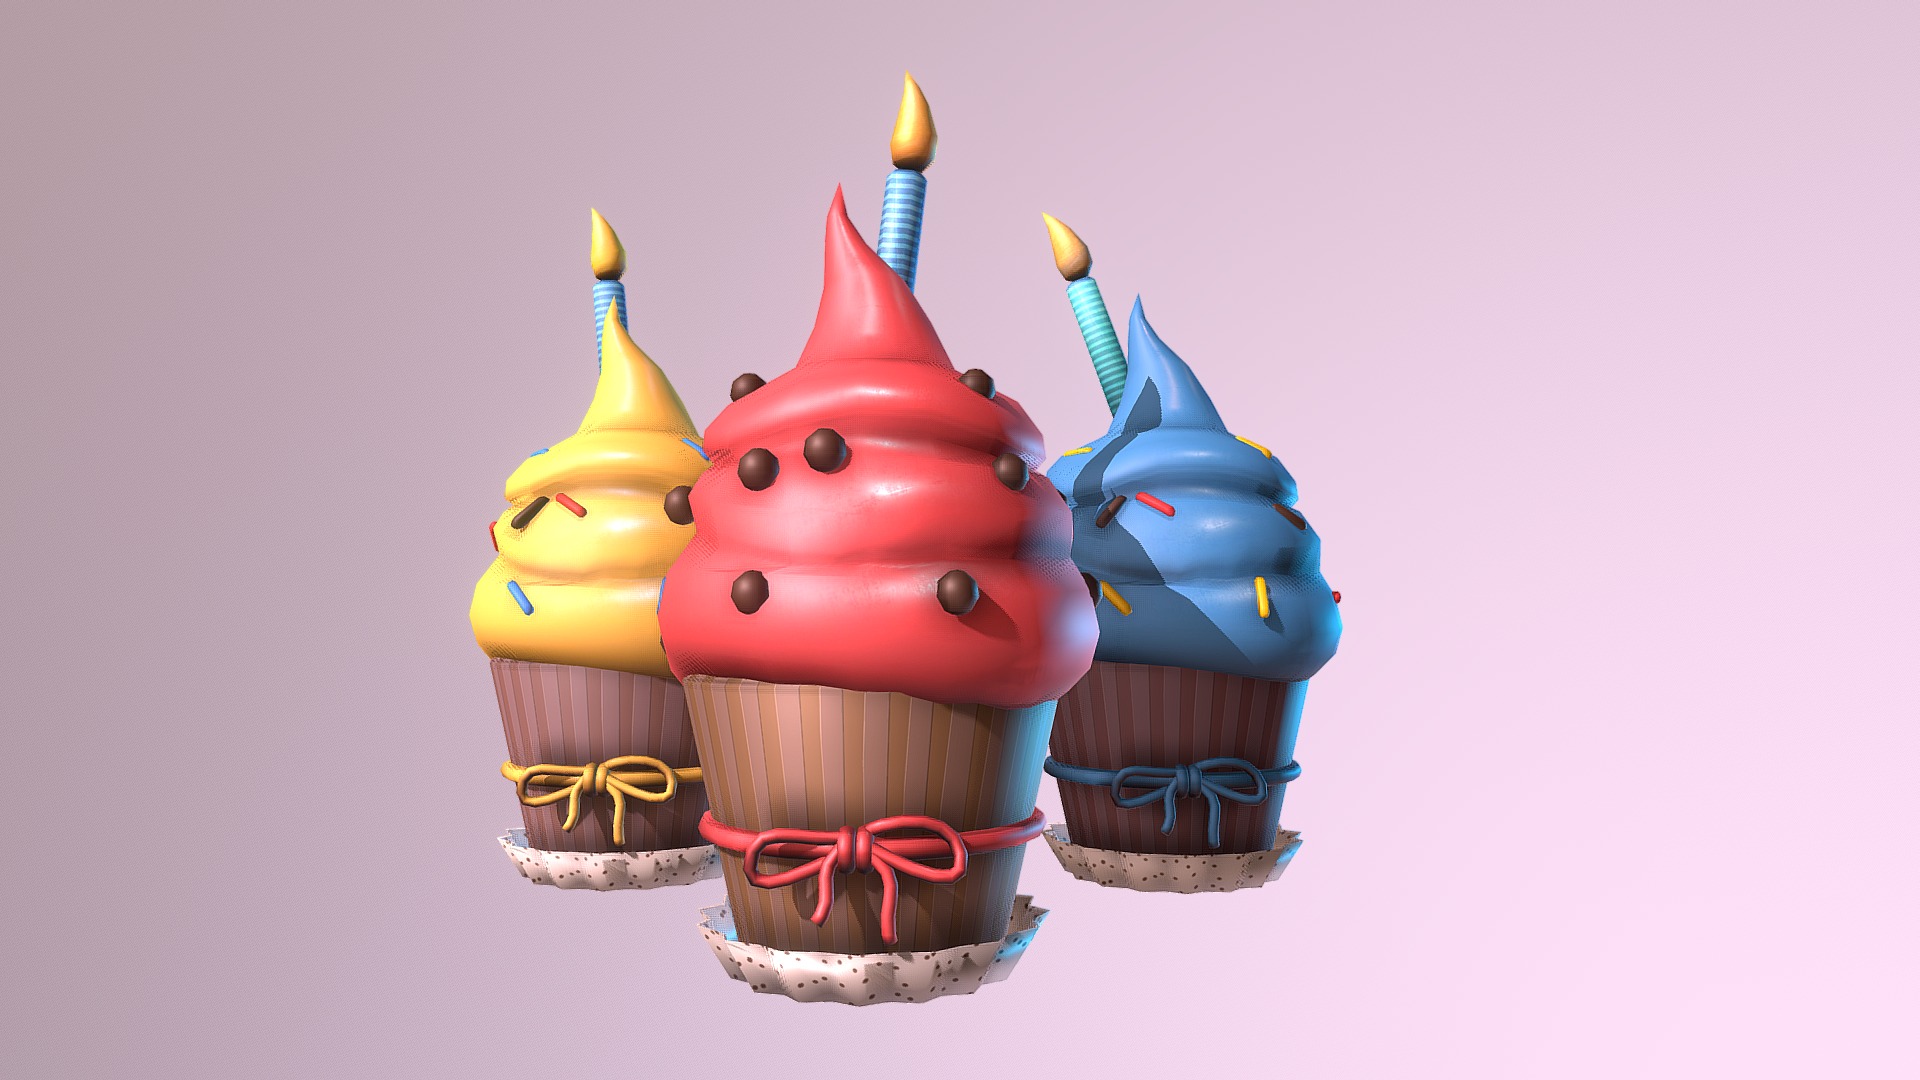 Hello Everyone,
I made this model with love,so you are easy to use it :)
note : suitable for games and Film

Model Description :
Name Model : Cupcake
Model Type : Props
1.Neat Model
2.Ready to rigging
3.Neat poly
4.Neat UVW
5.Texture And Shader

3D File Formats Included :
1.blend (blender)
2.obj (multi format)
3.fbx (multi format) 
4.3ds (multi format) 

Thank you for your attention,
I hope my information can help you.
If you have any questions, I'll be happy to help you.

Warm regards :) - Cupcake - 3D model by rezapermanaworks 3d model